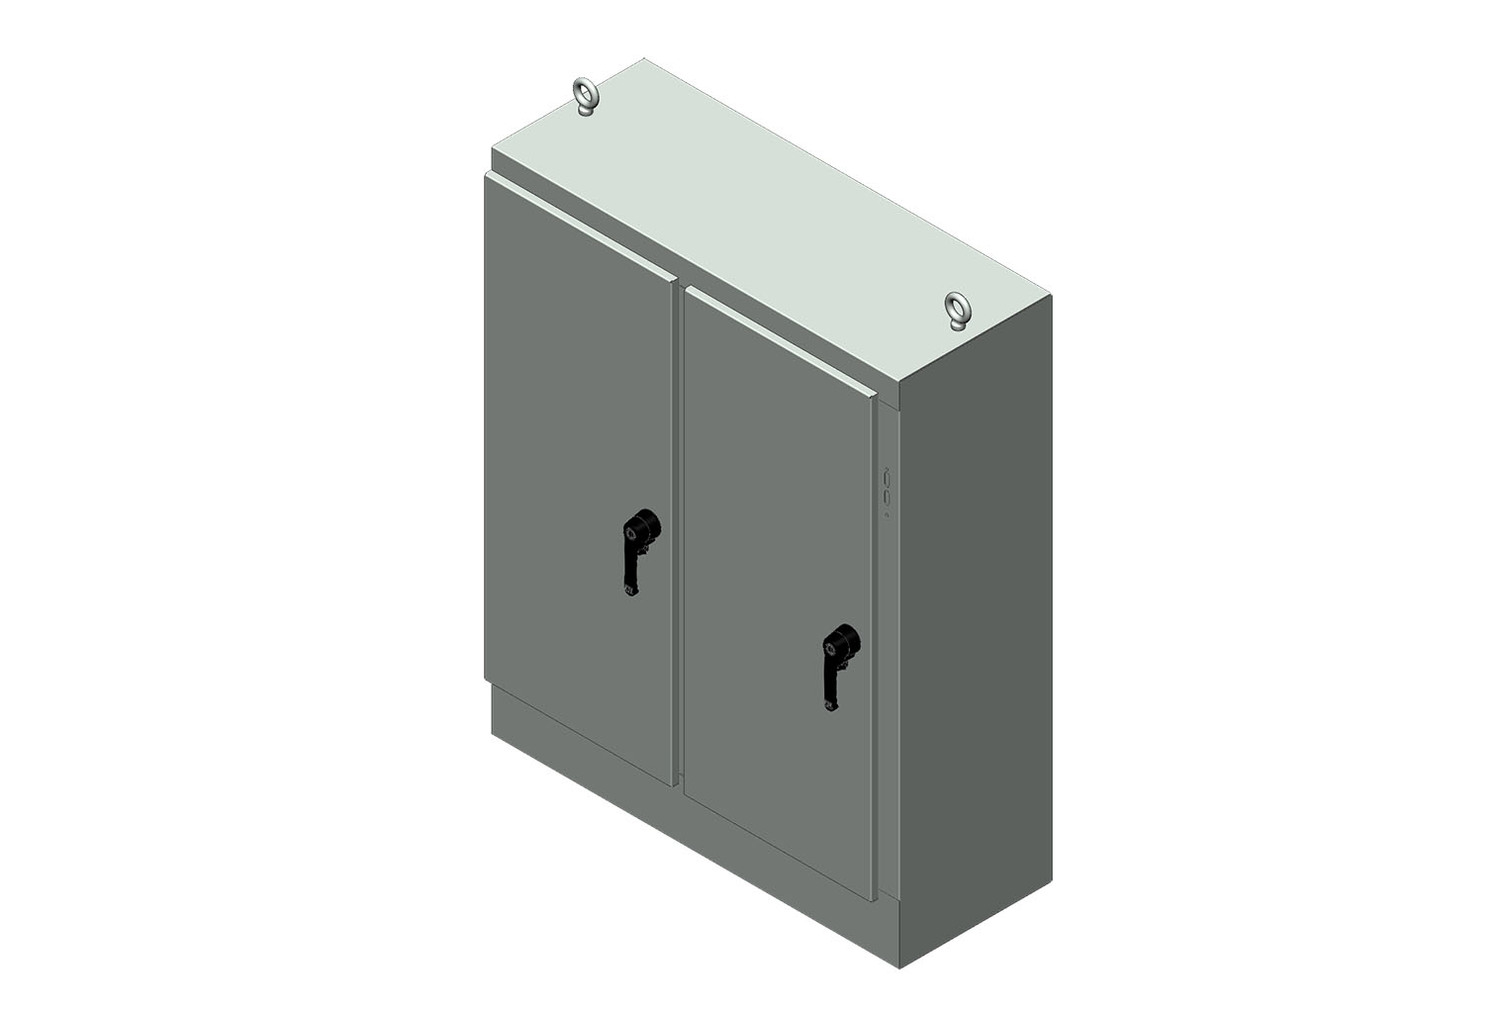 RMR Free-Standing Disconnect Enclosure, Type 4, with Solid Double Door - Image 4